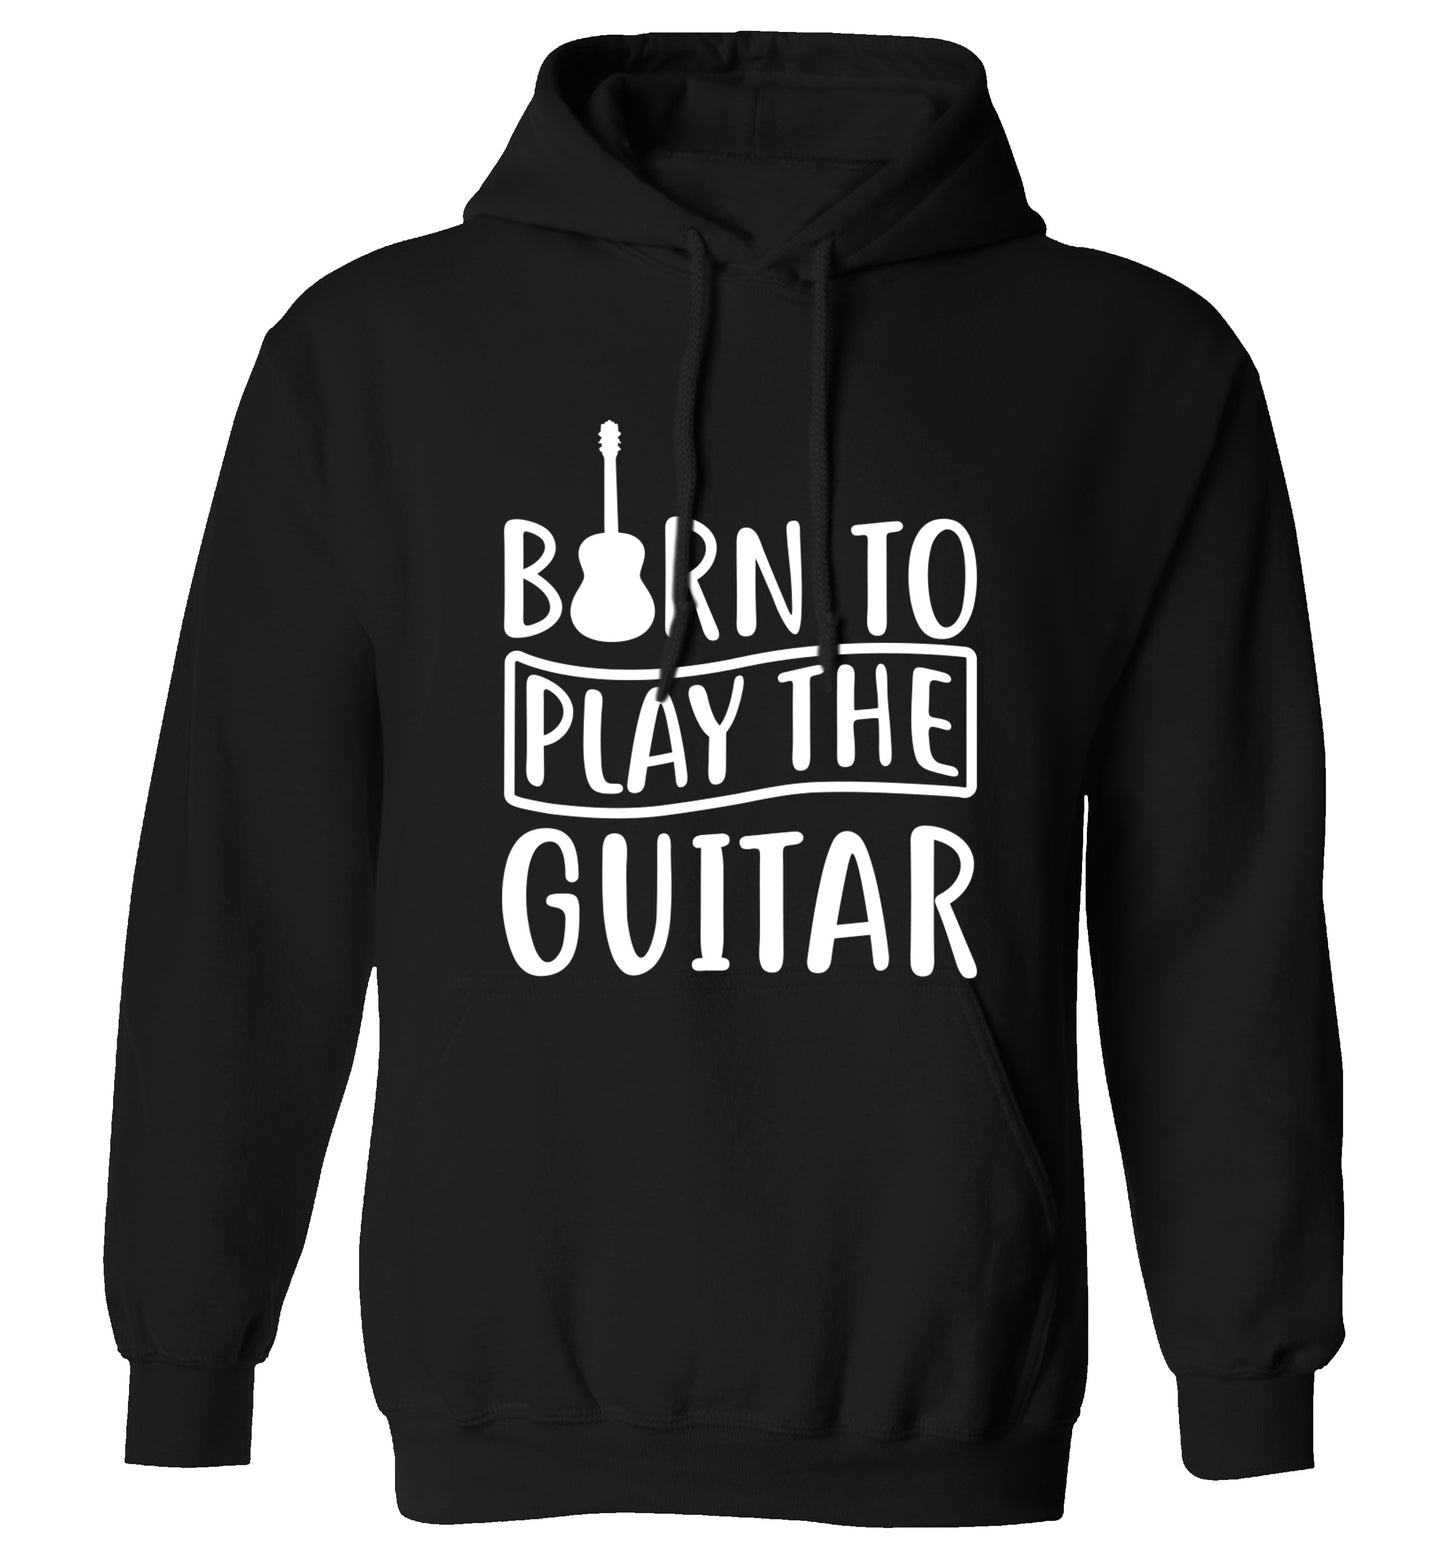 Born to play the guitar adults unisex black hoodie 2XL